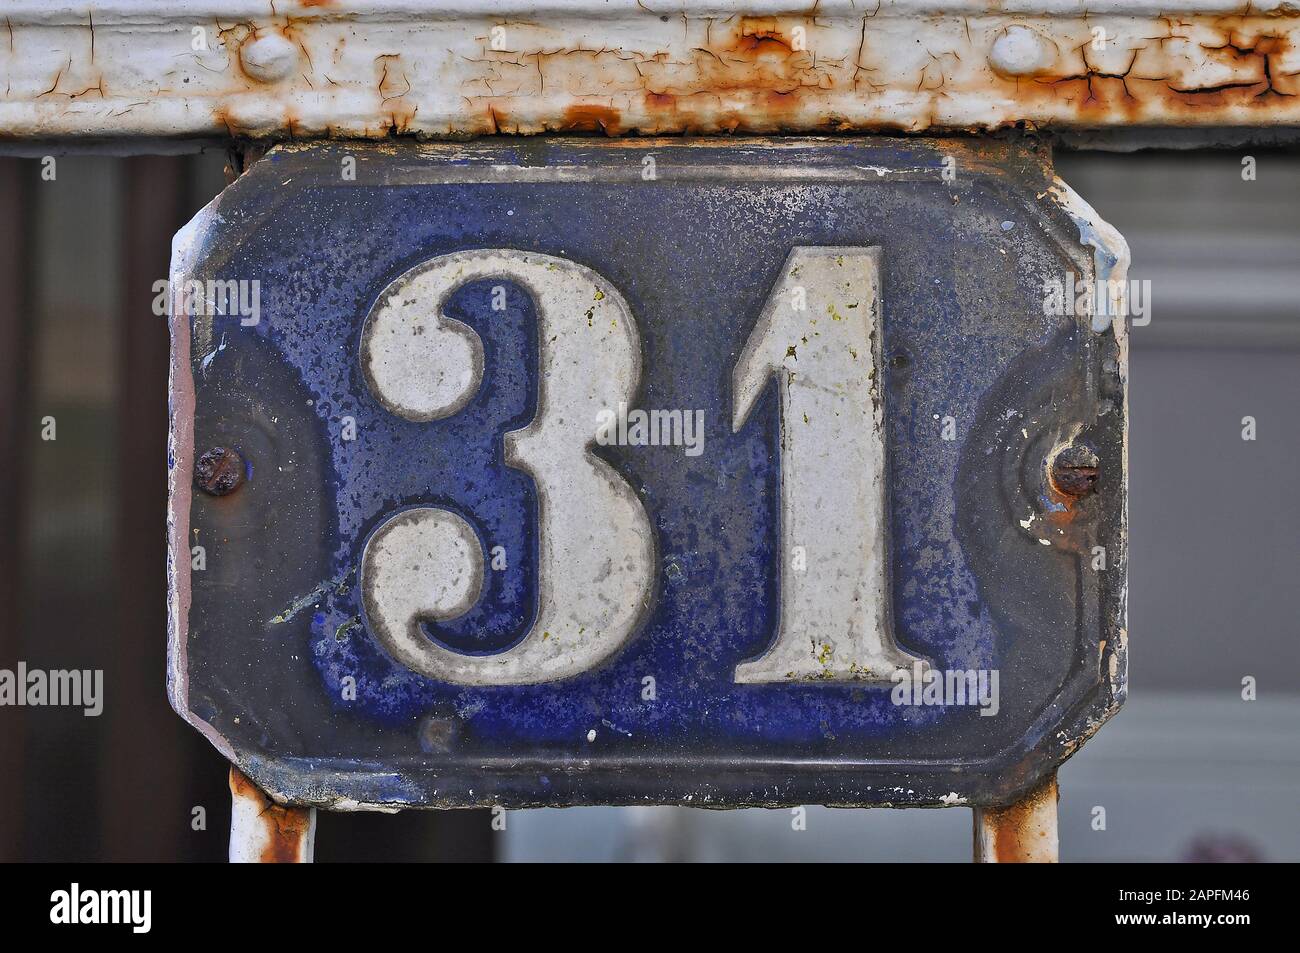 A house number plaque, showing the number thirty one (31) Stock Photo